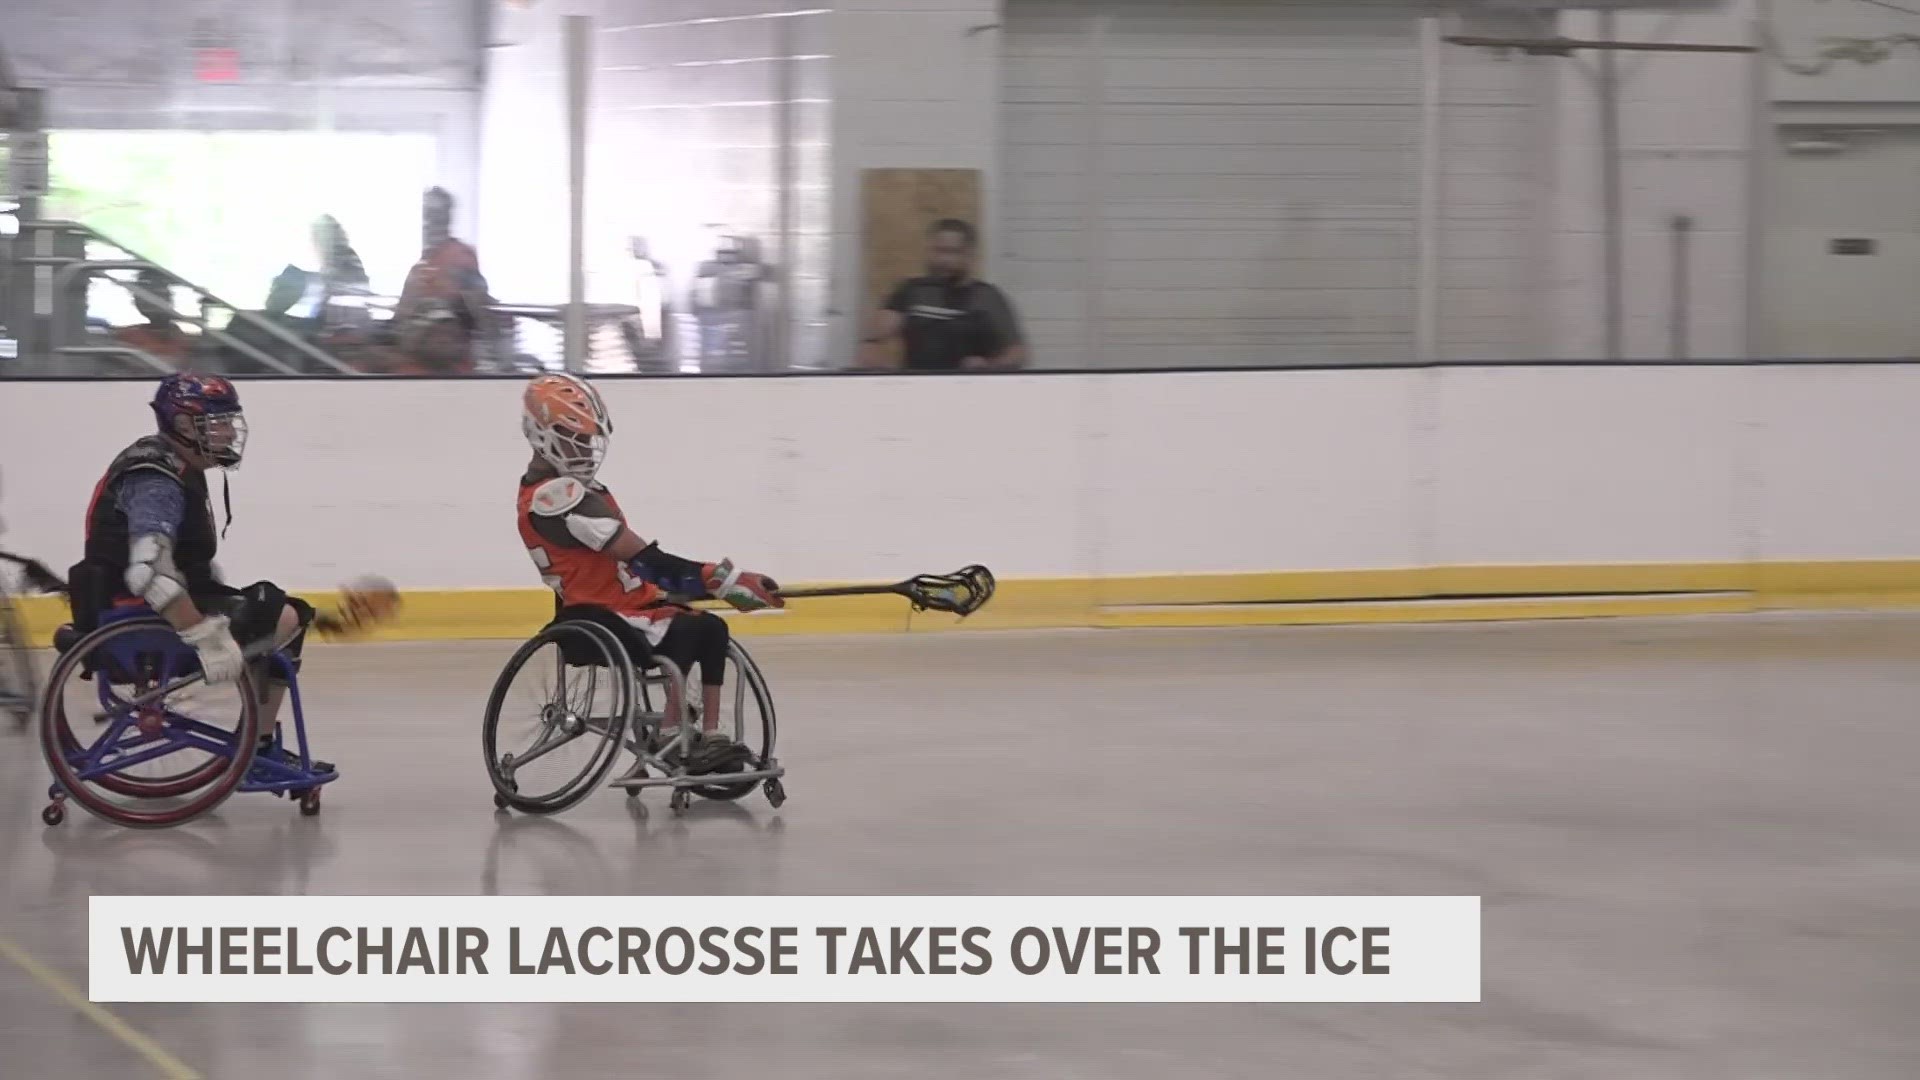 Grand Rapids' first wheelchair lacrosse tournament welcomed five teams from around the country with close to 60 athletes taking part this weekend.